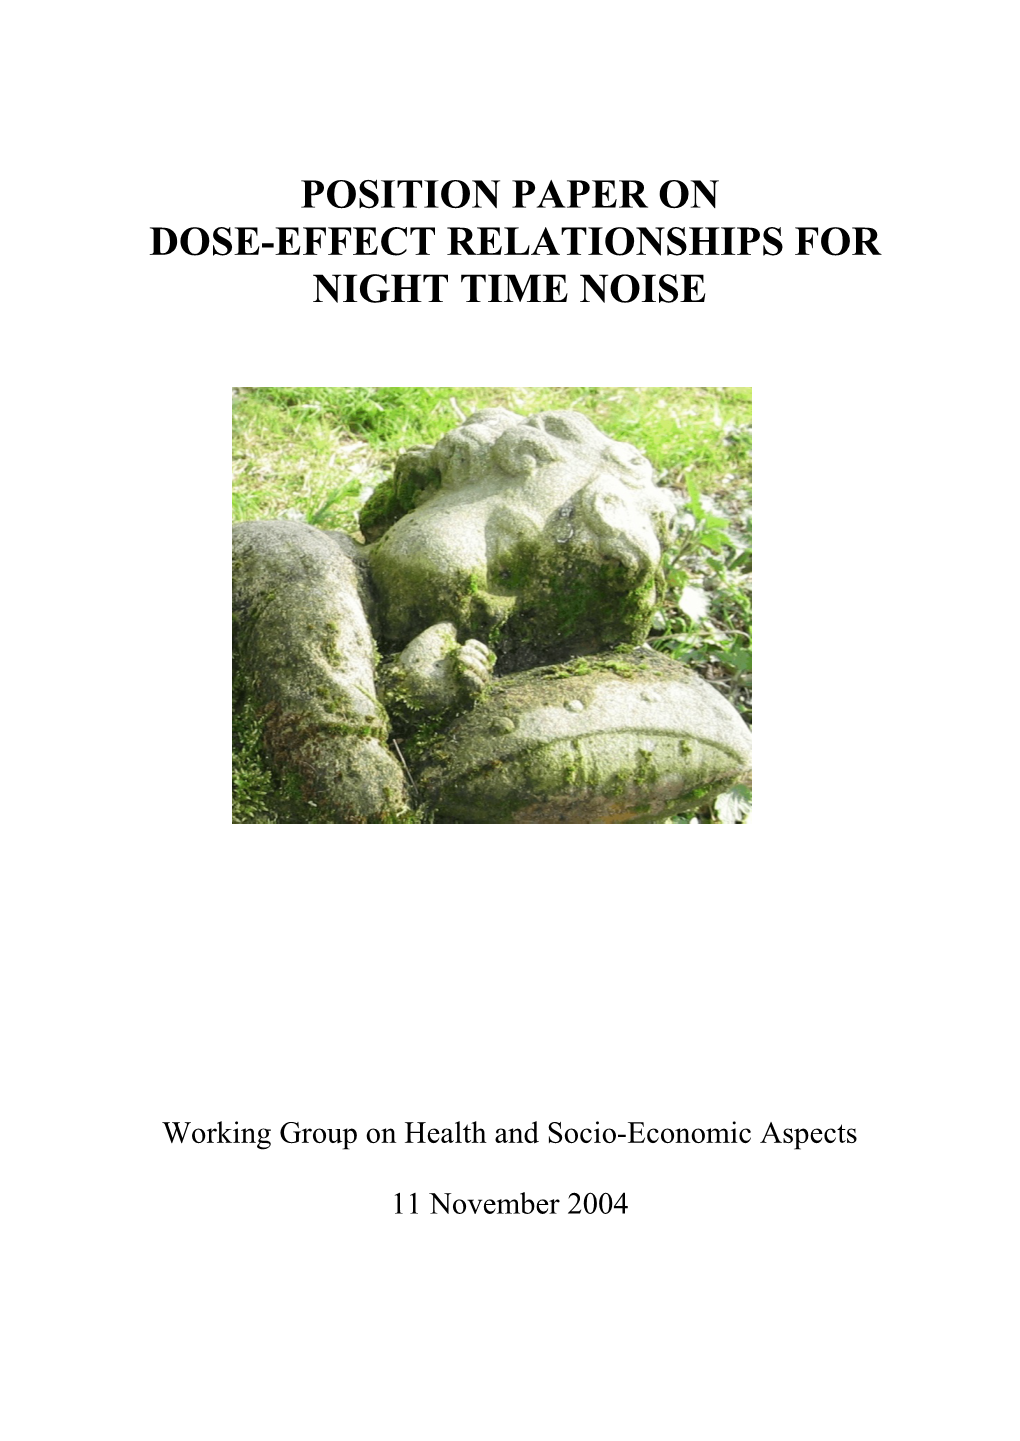 Position Paper on Dose-Effect Relationships for Lnight